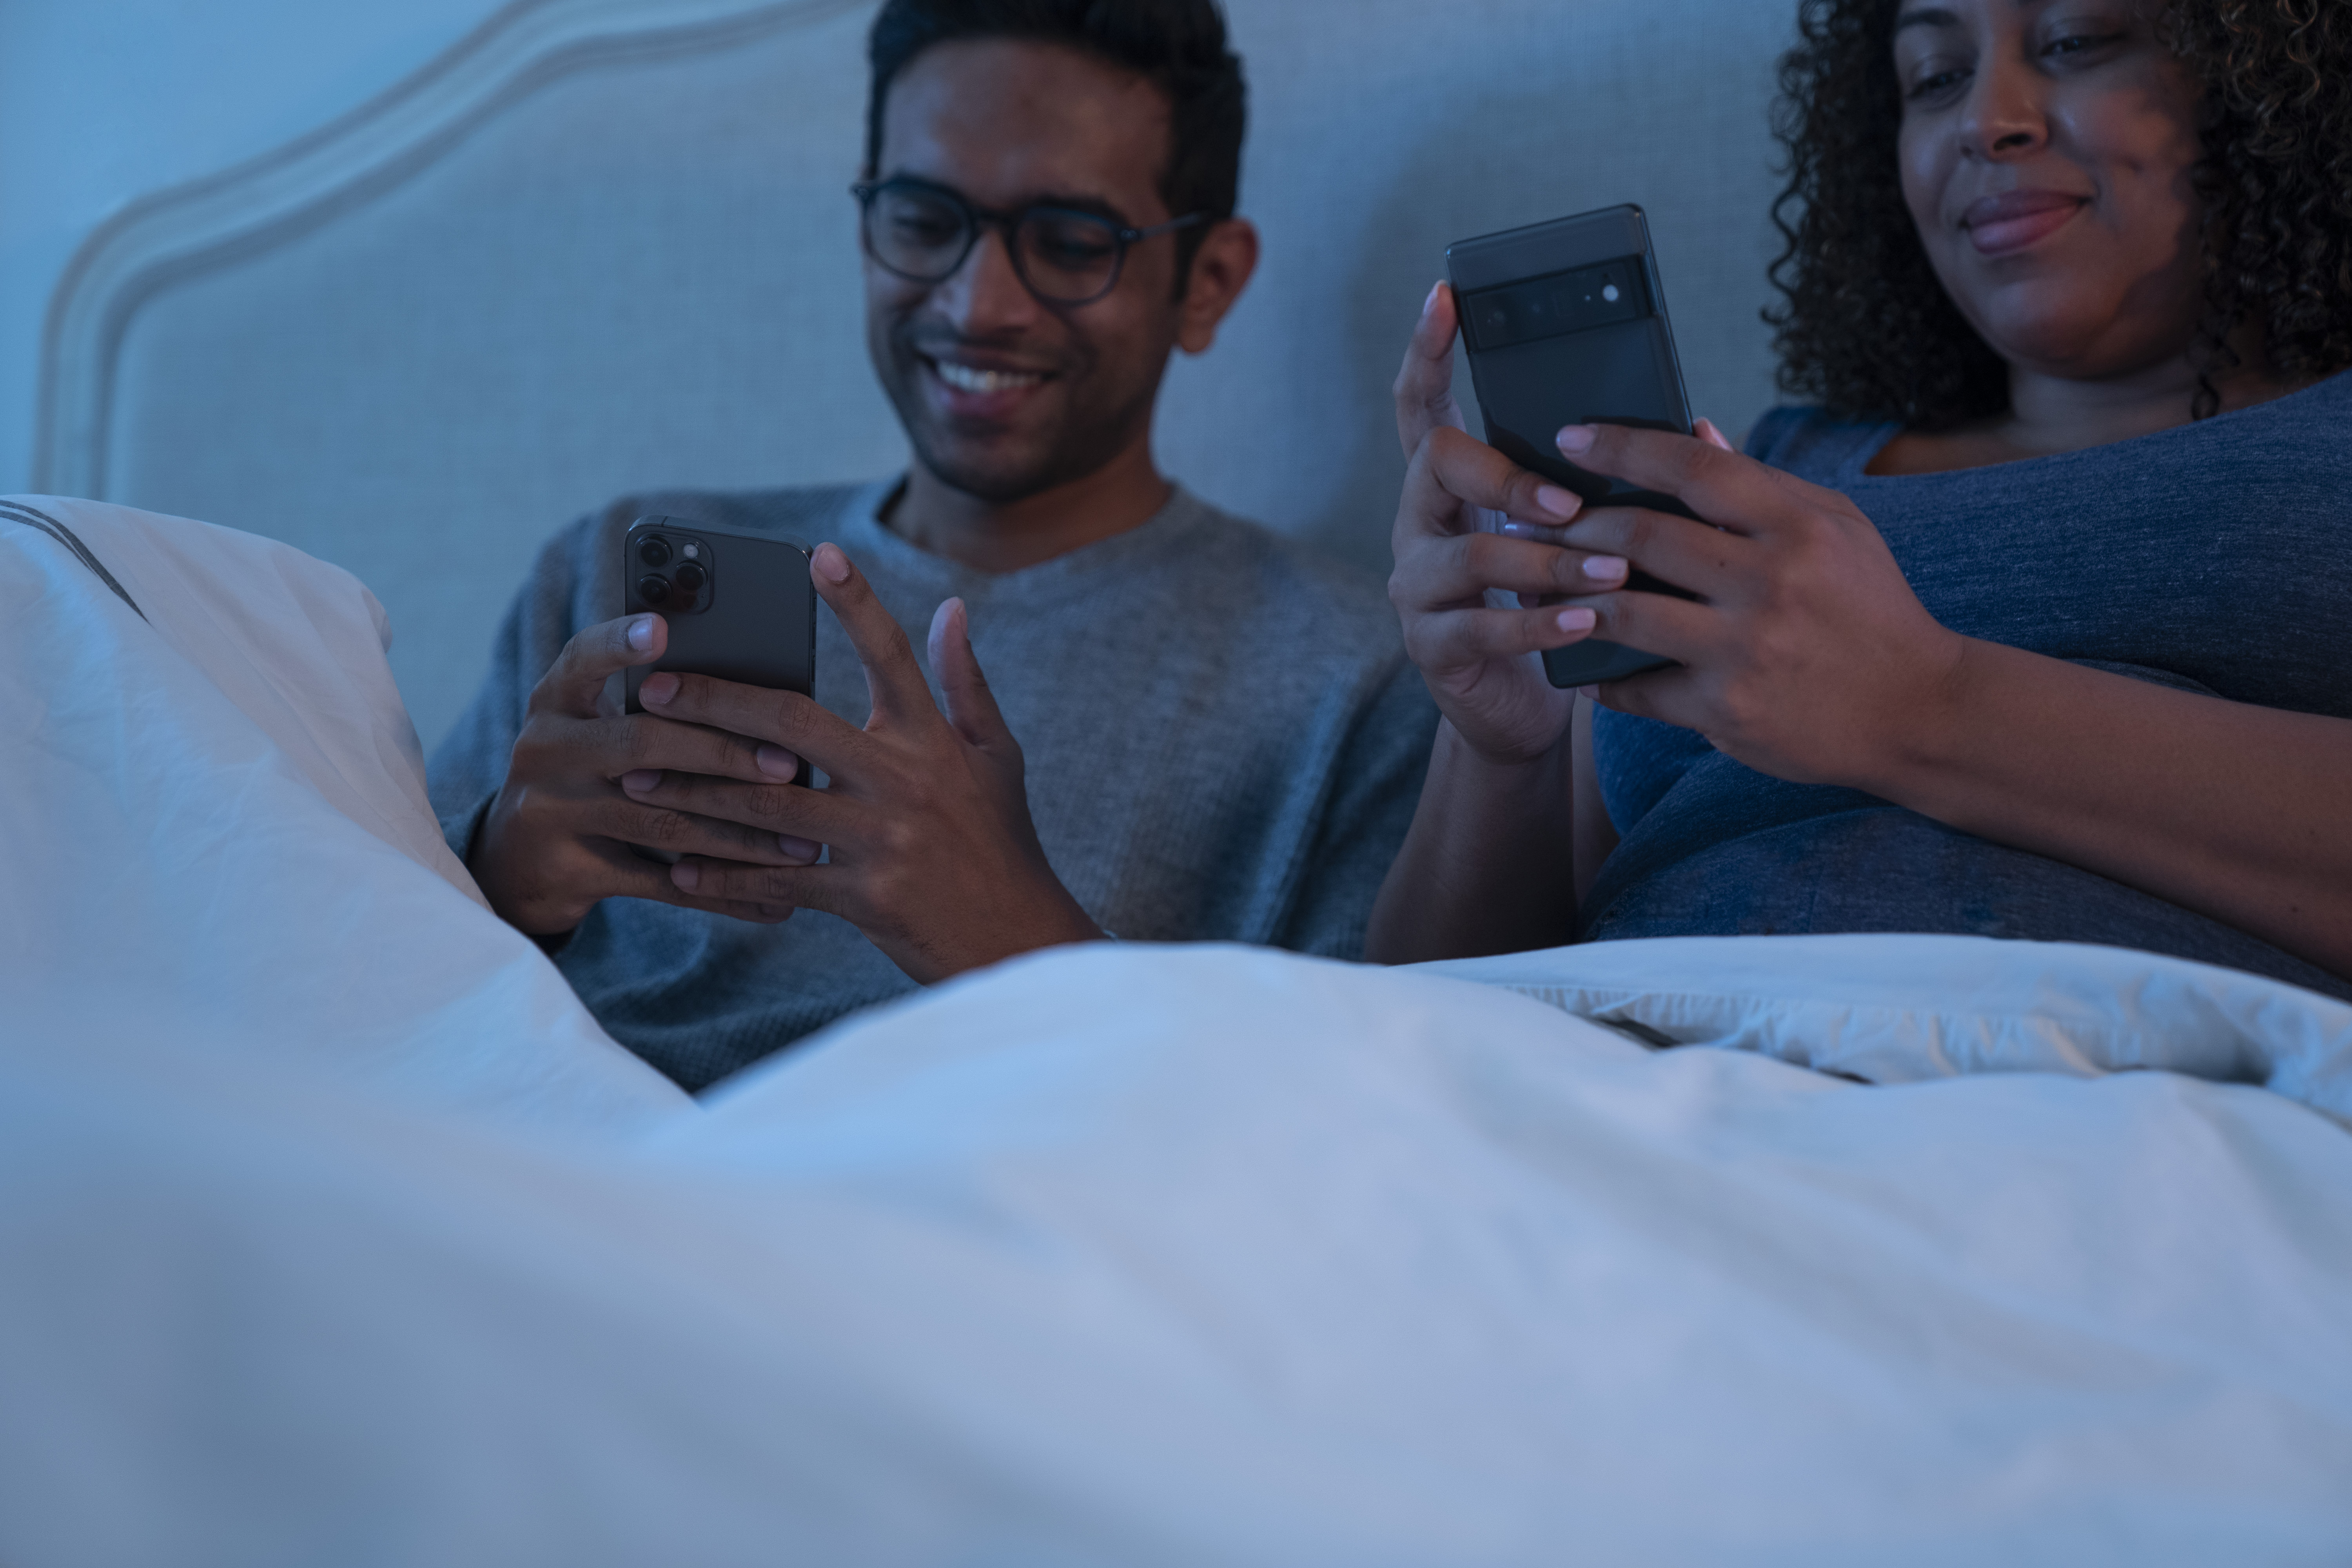 A couple play mobile games together in their bedroom.